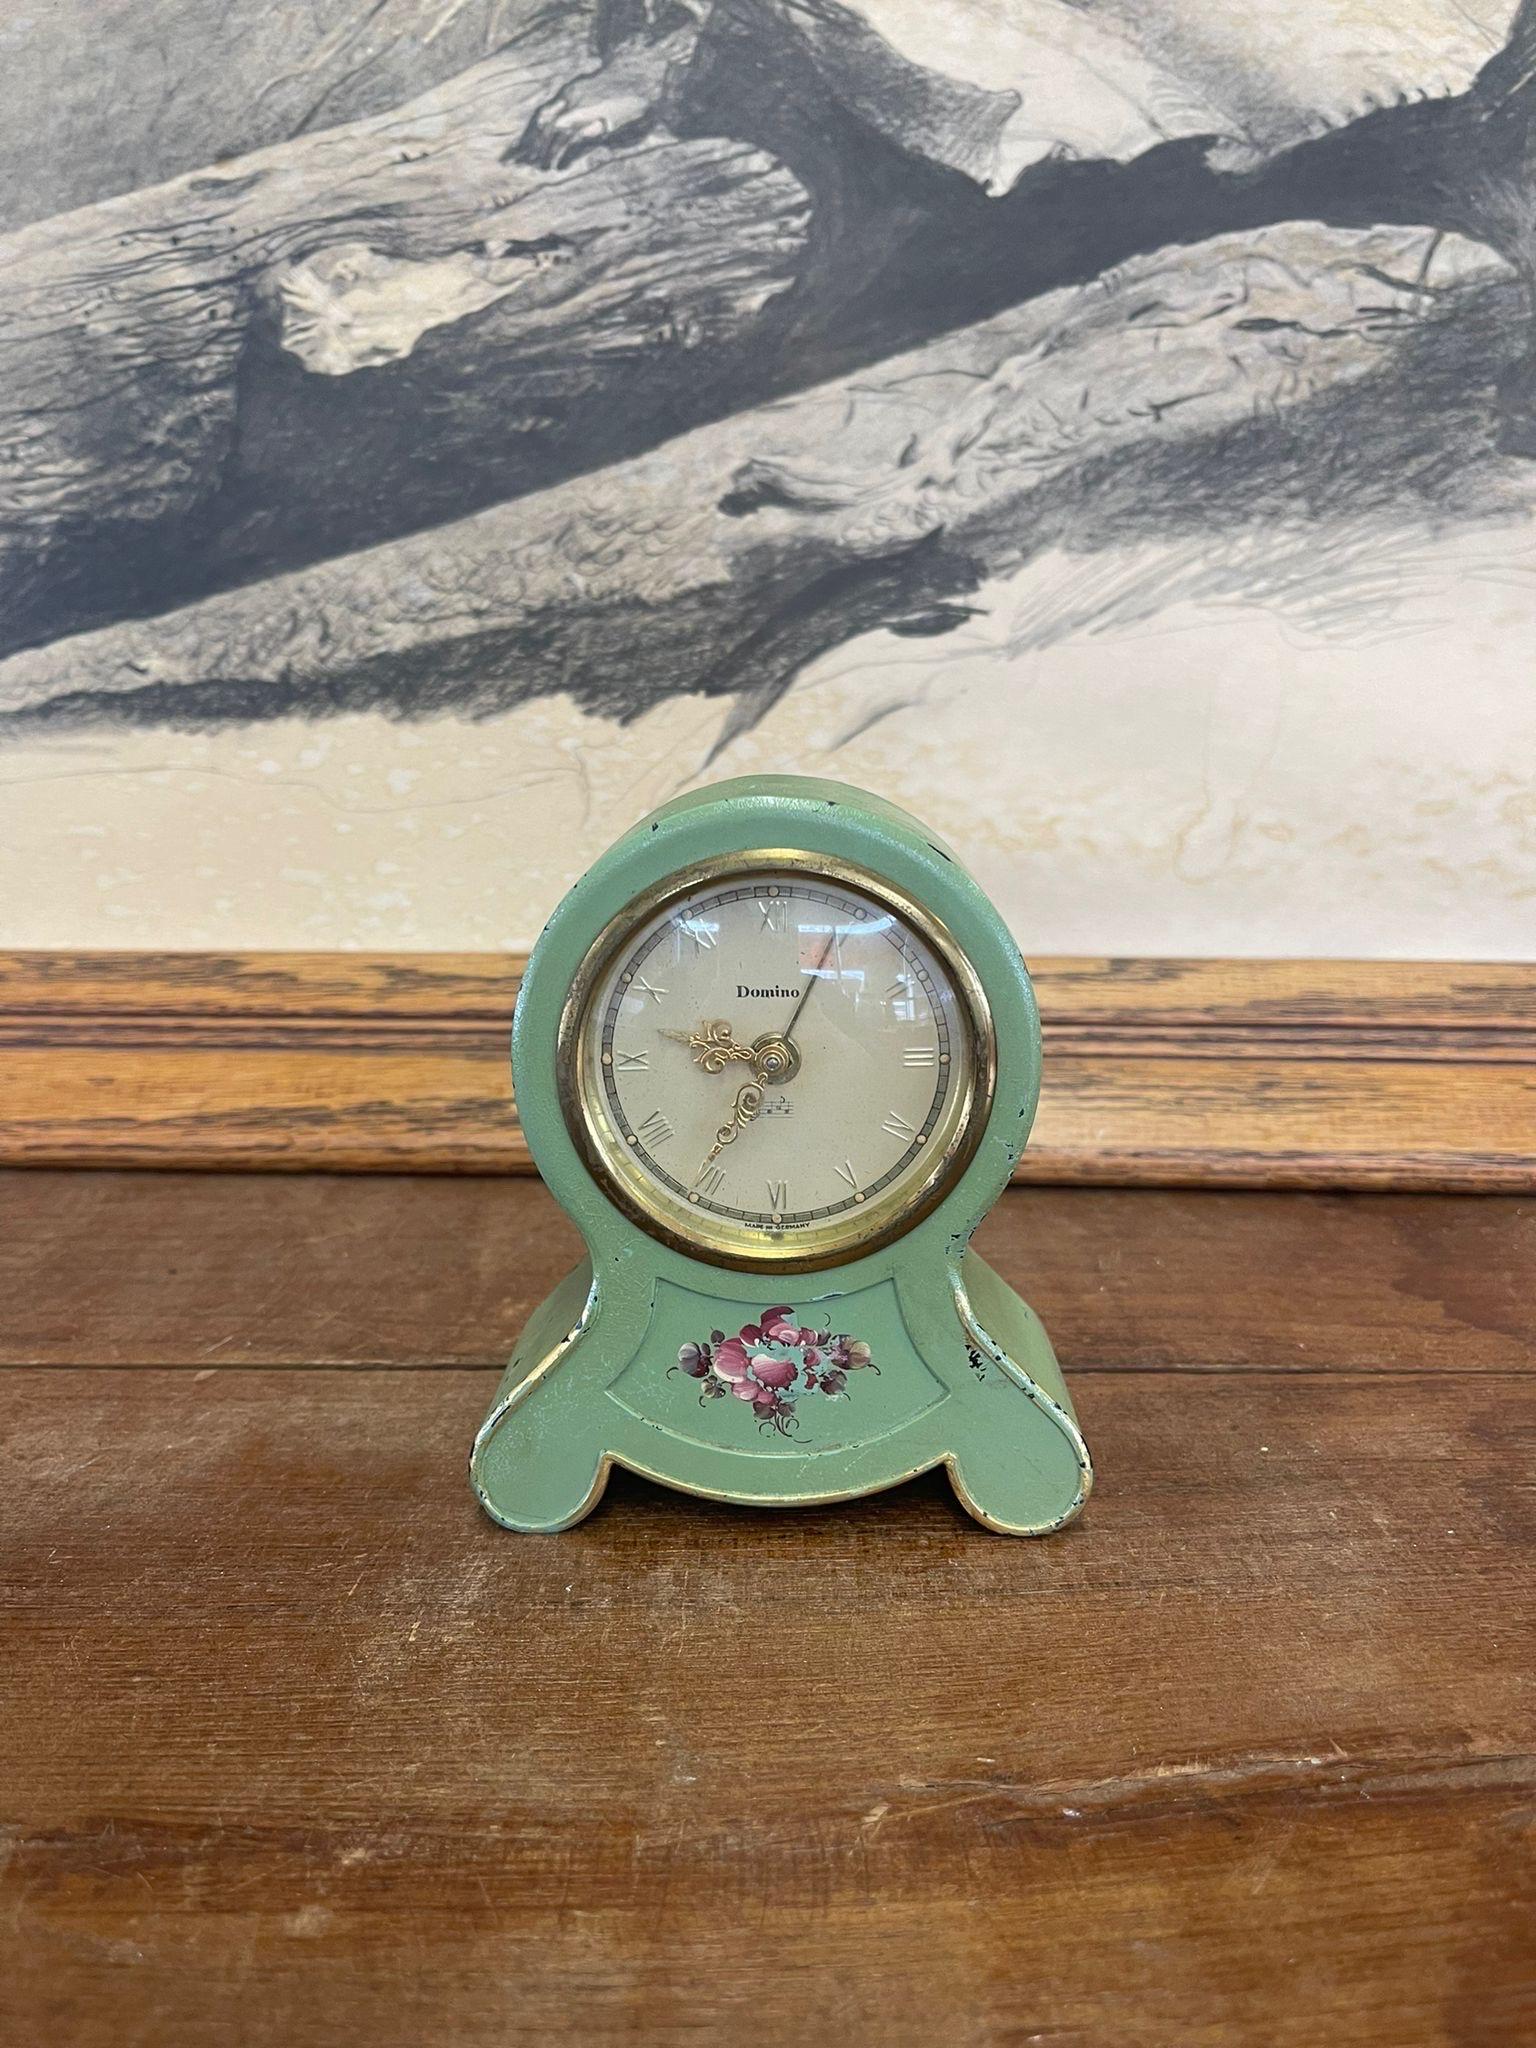 This Clock plays Brahms Lullaby at the turn of the knob in the back. Original use was as an alarm Clock. Decorative Use, alarm and clock are not functional. Sage green colored with gold toned accents. Floral Motif on the front. Vintage Condition